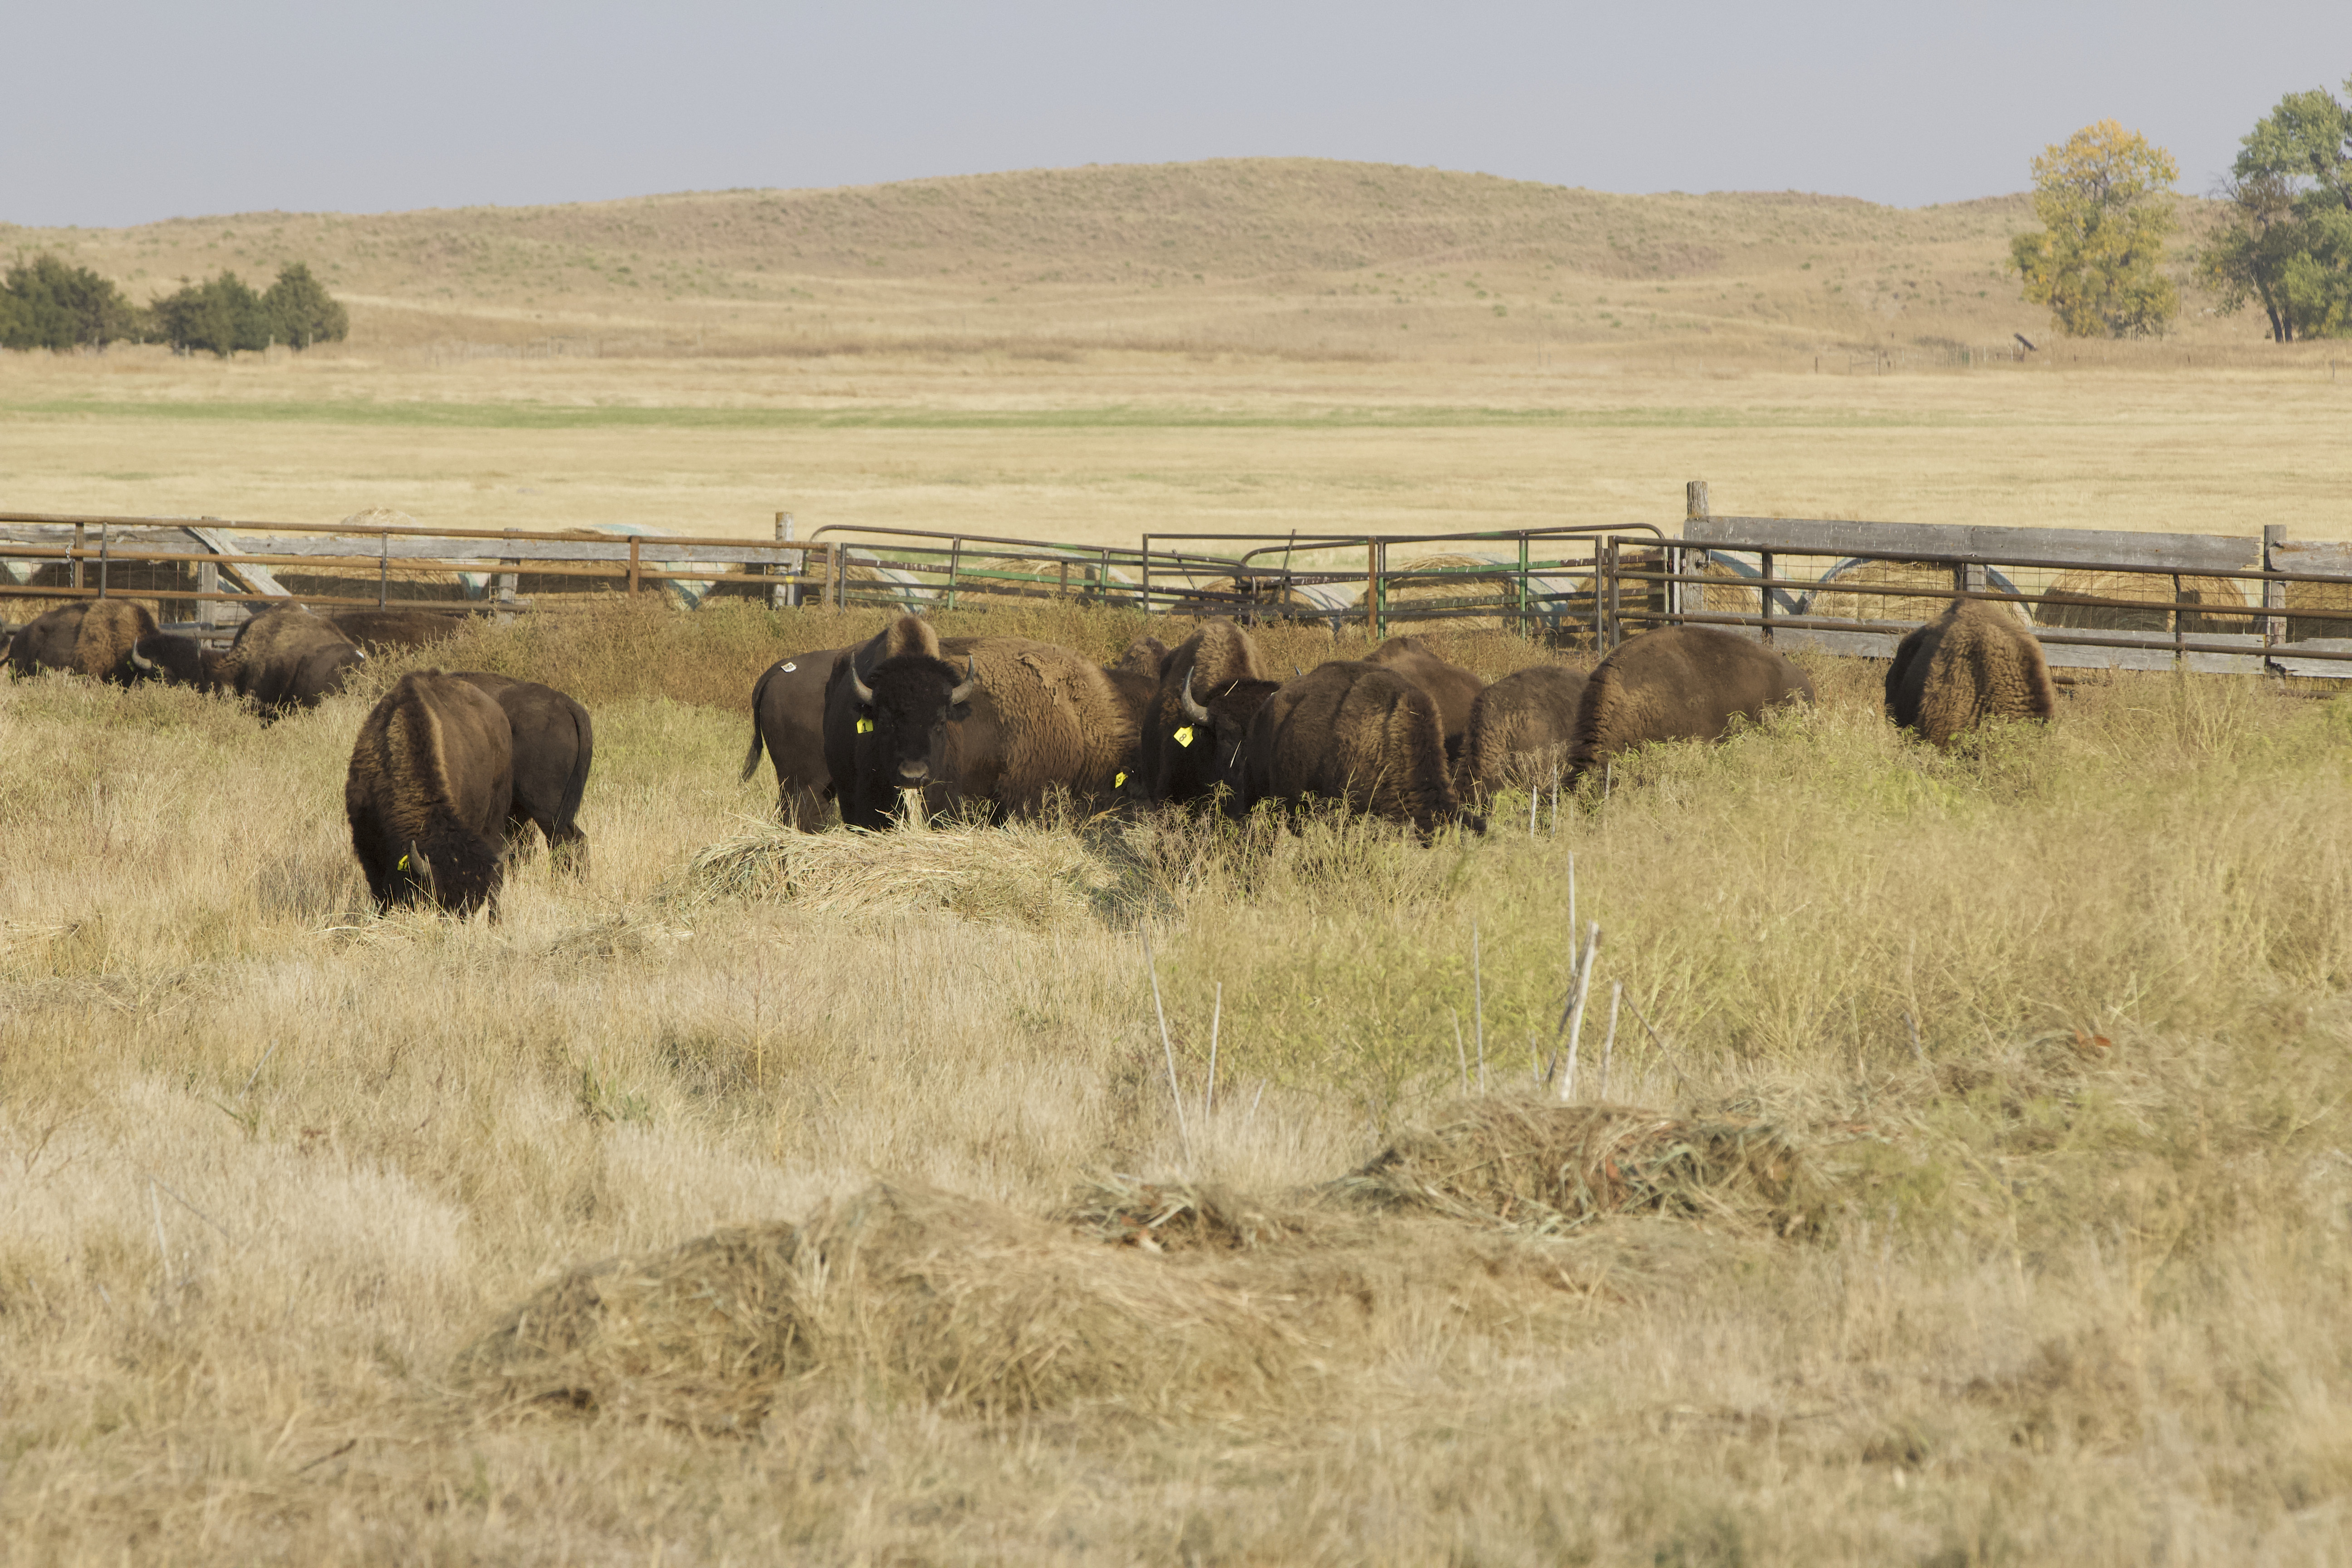 A herd of bison walking across a dry grass field. Past a fence enclosing the bison lays an extensive grassy landscape dotted with trees.